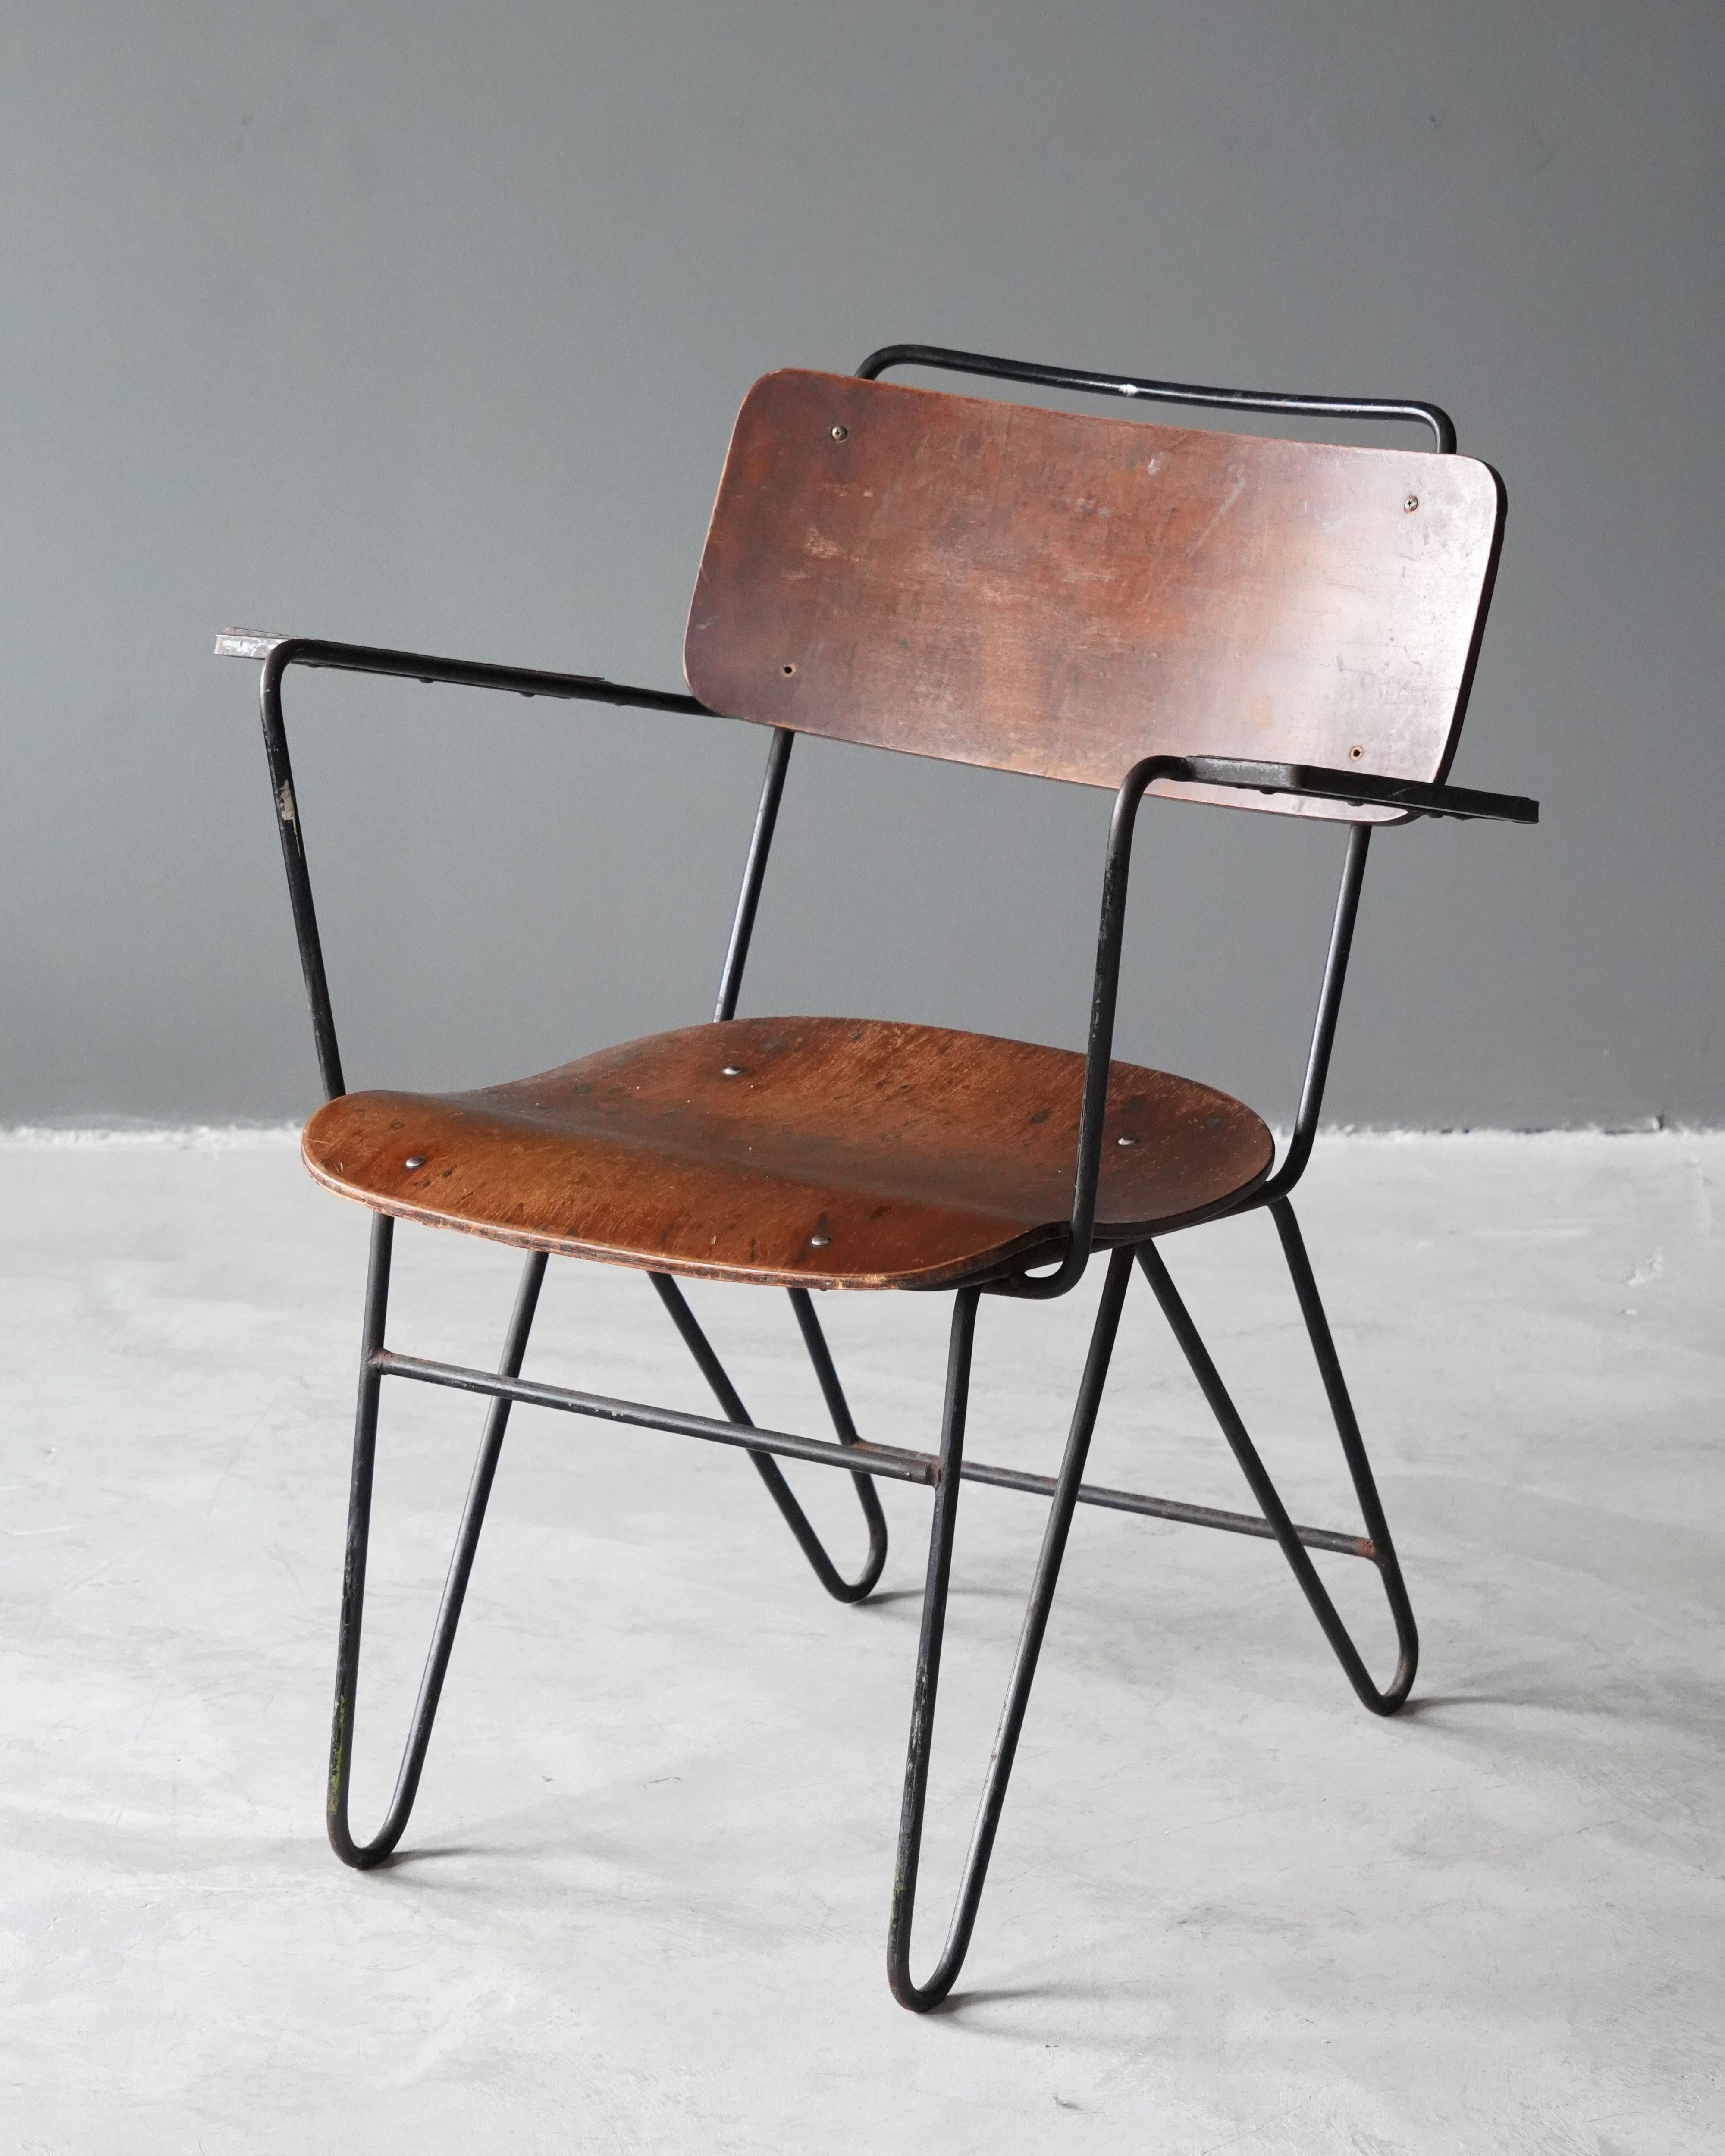 A modernist armchair / side chair. Designed and produced in America, 1940s. Features moulded plywood and lacquered metal. 

Other designers of the period include Warren Mccarthur, Paul Frankl, Paul Laszlo, Charles and Ray Eames, and Kem Weber.